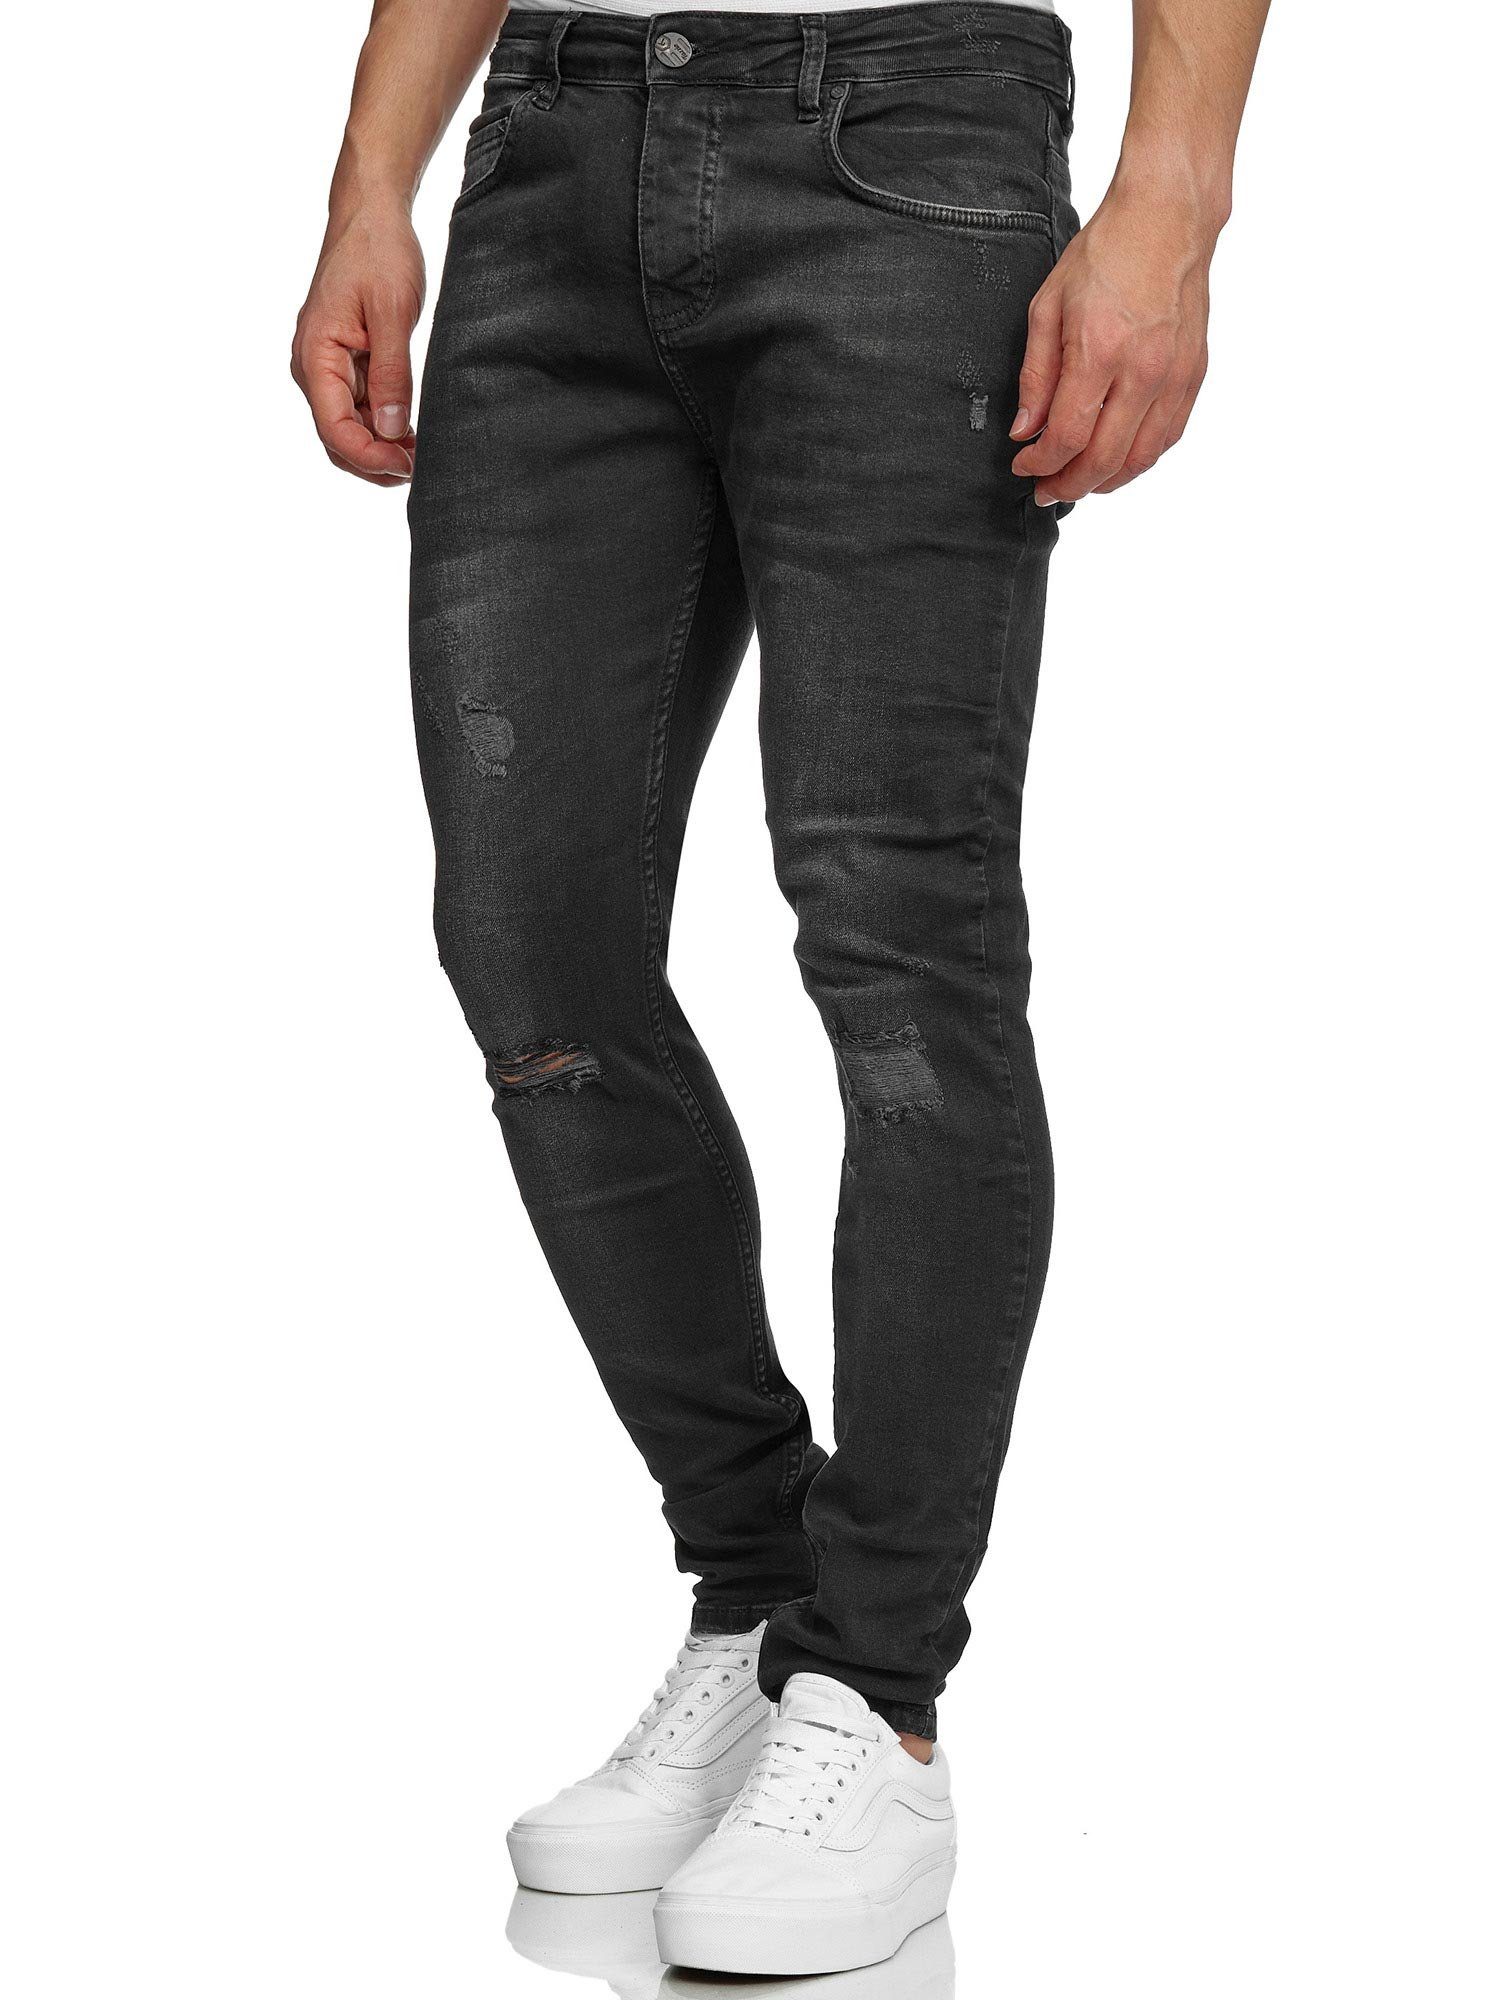 Destroyed Jeans online kaufen » Ripped Jeans | OTTO